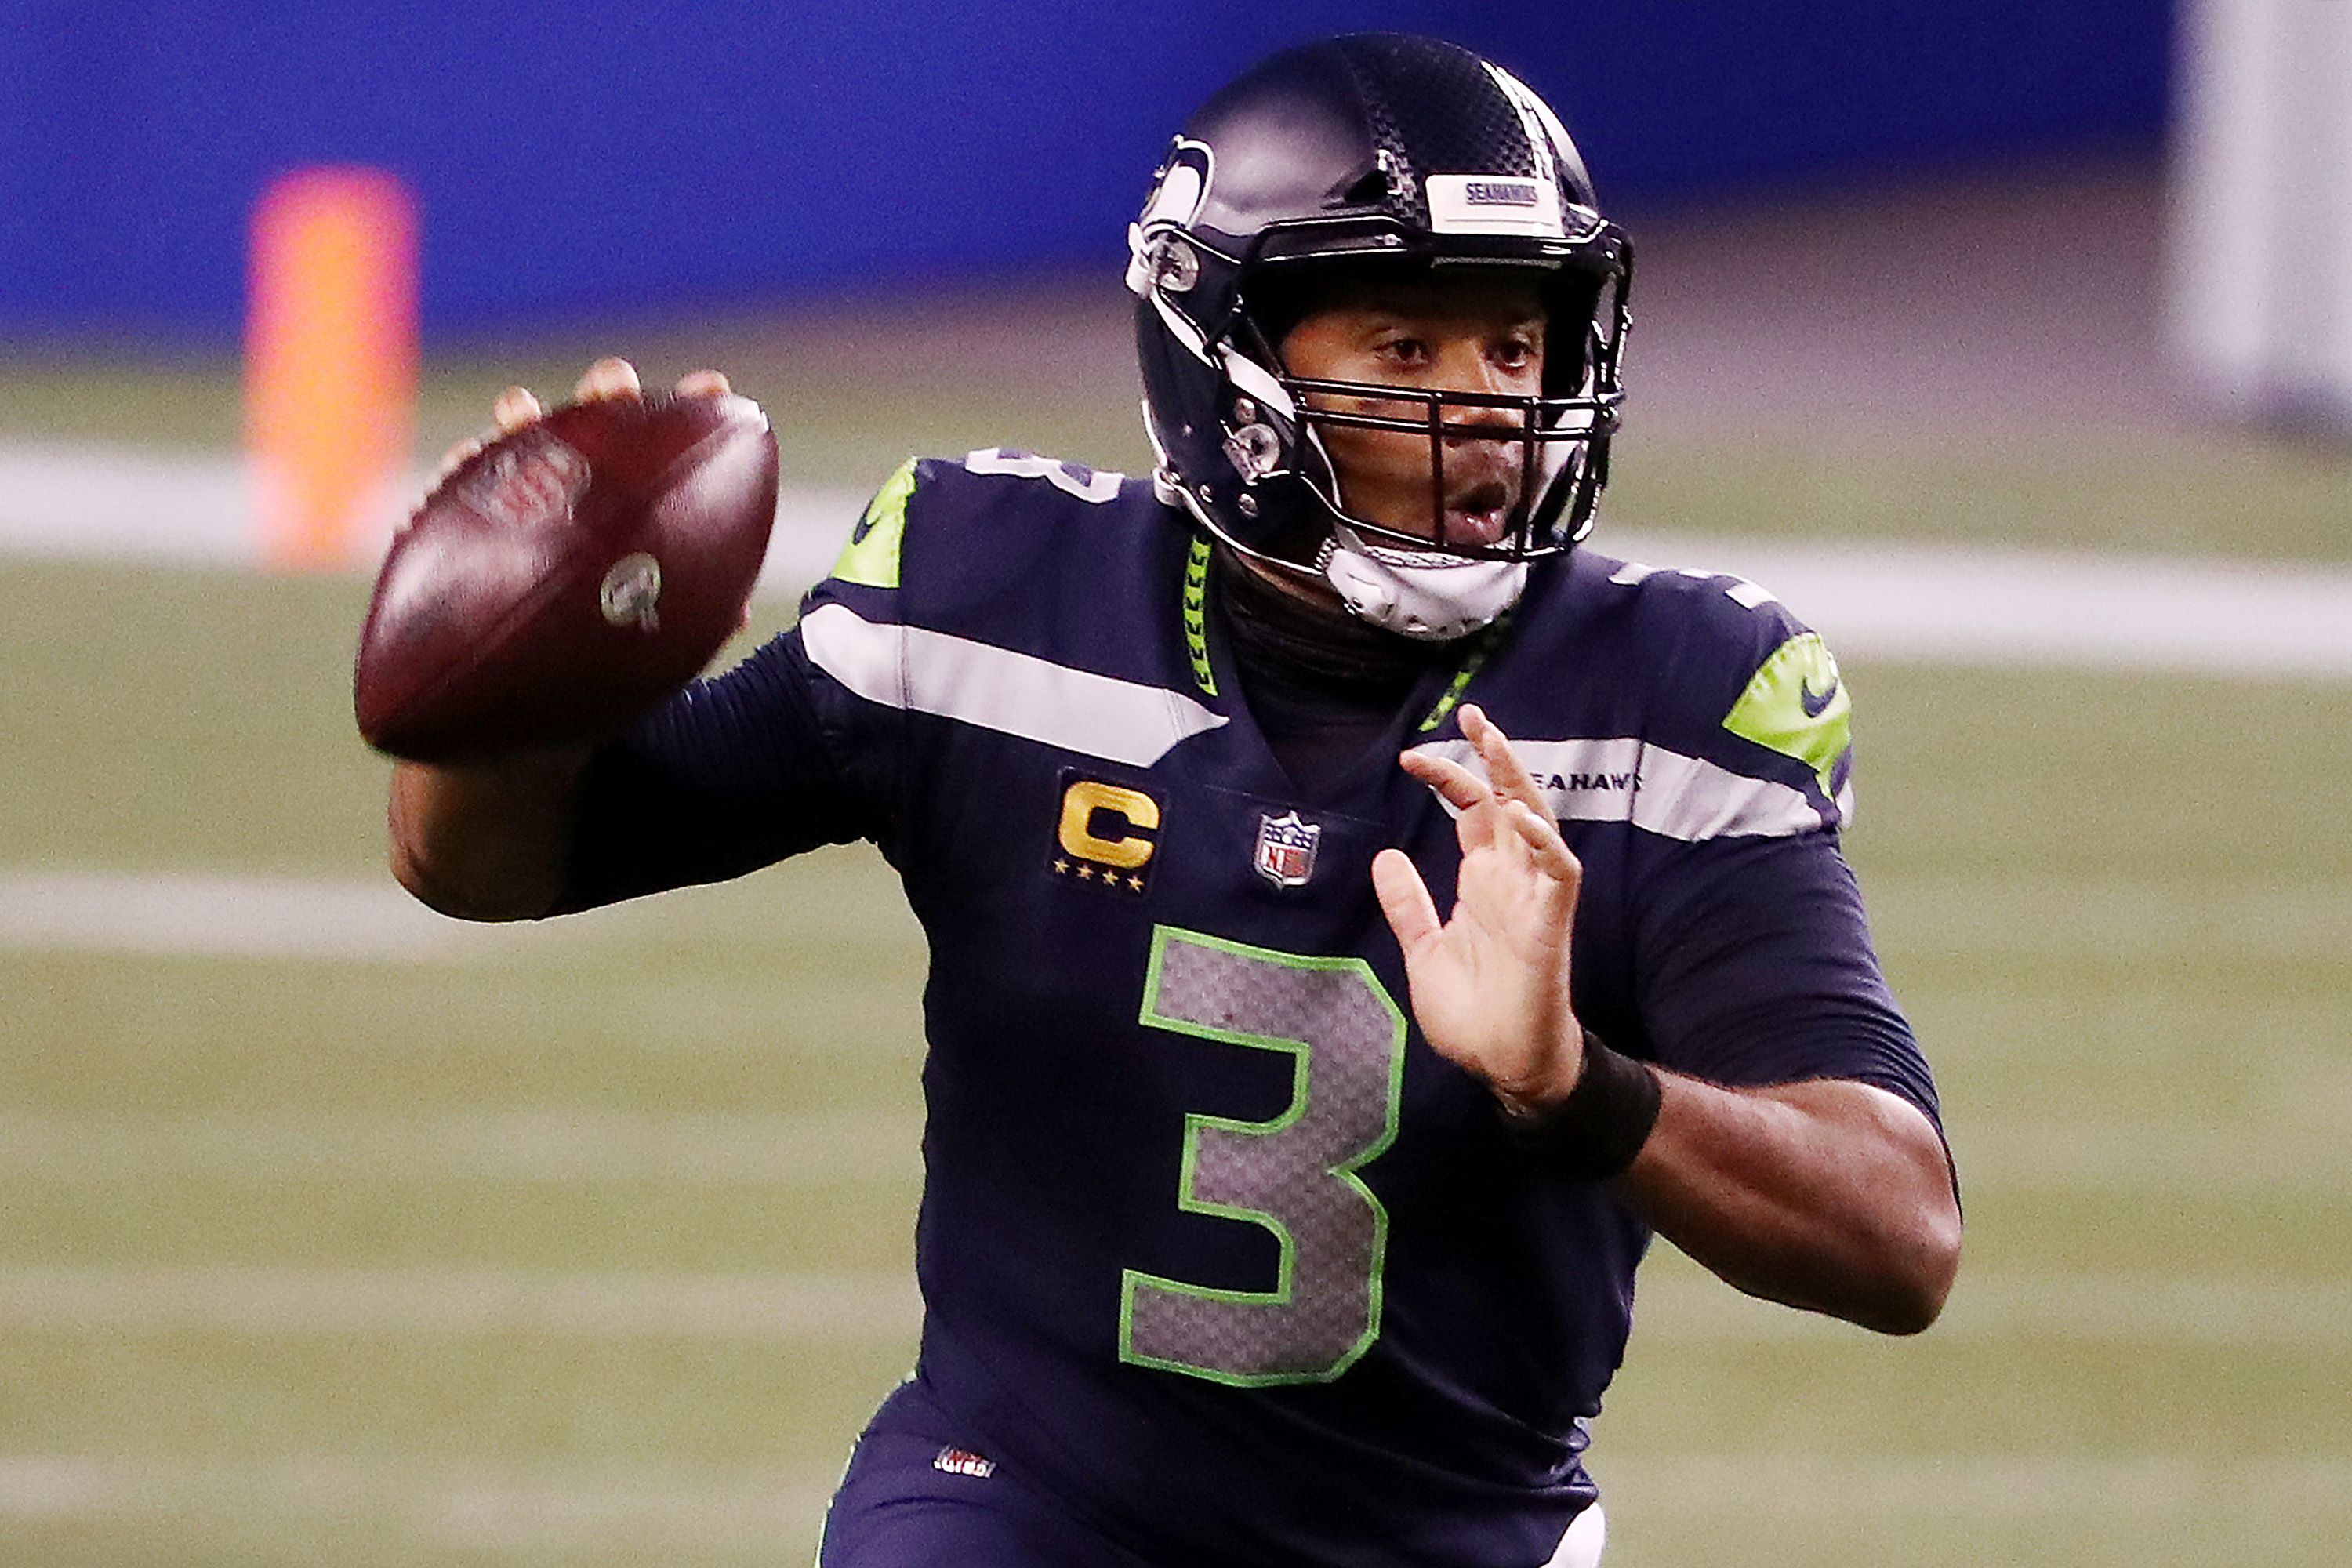 Russell Wilson prepares to throw a pass in an NFL game.